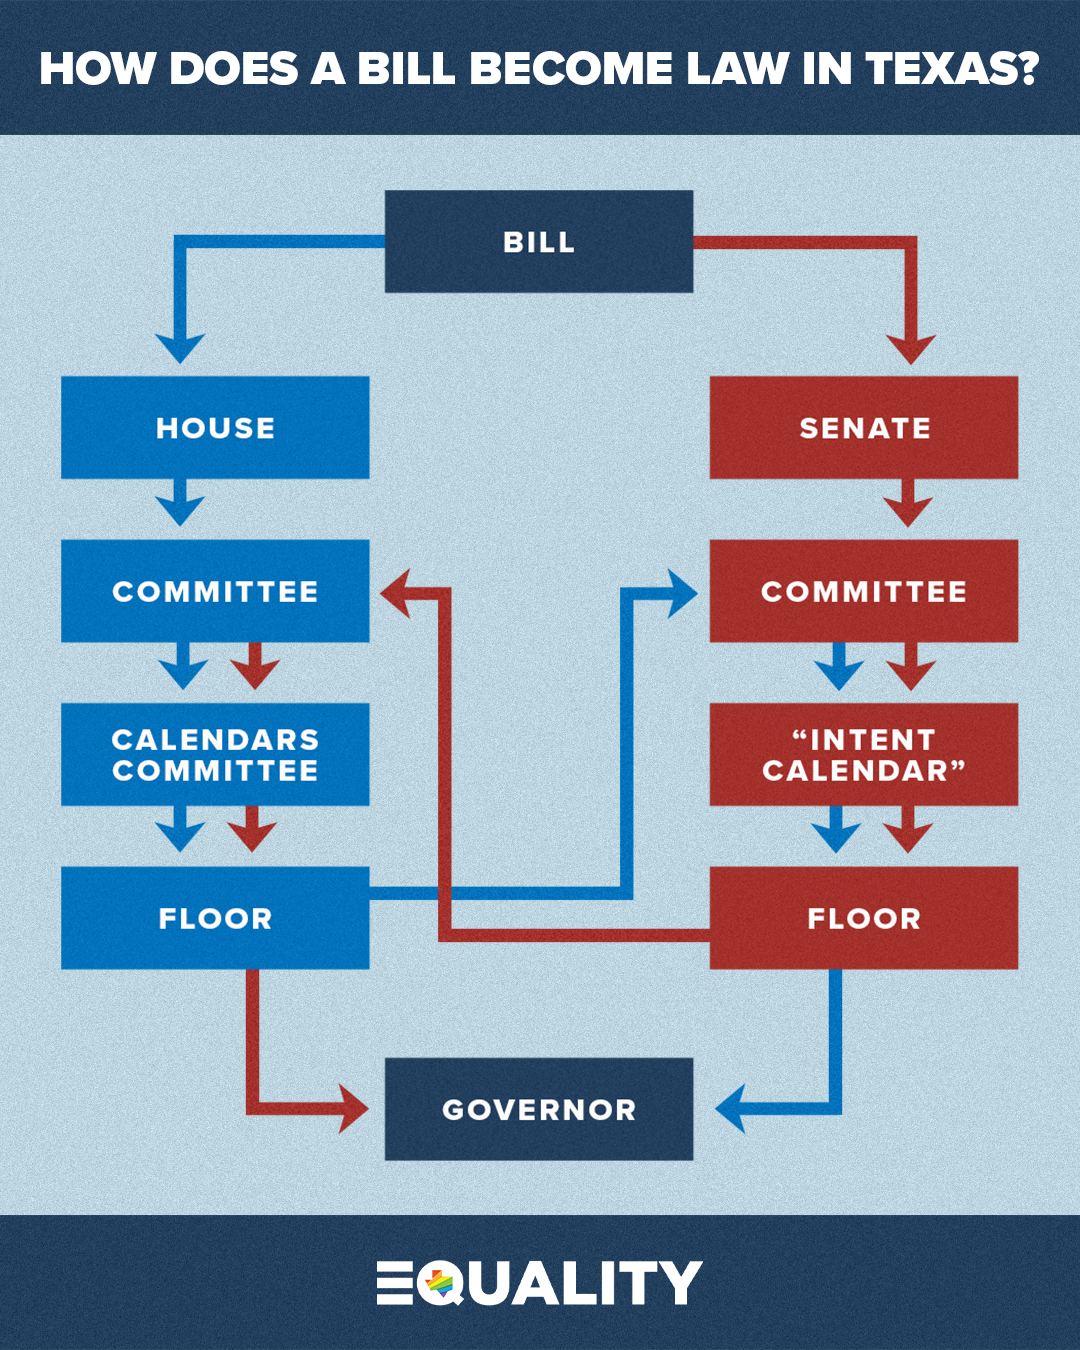 A flow chart illustrating how a bill becomes a law in Texas. At the top is where a bill begins. On the left side in blue, the bill starts in the House, moves to committee, moves to the Calendars Committee, then to the House floor. From there, it moves over to the right side of the image and enters committee in the Senate. Then it moves to the Intent Calendar, then the Senate floor, and finally to the Governor. On the right side in red, the bill starts in the Senate, moves to committee, moves to the intent calendar, then to the Senate floor. From there, it moves over to the left side of the image and enters committee in the House. Then it moves to the Calendars Committee, then the House floor, and finally to the Governor. 